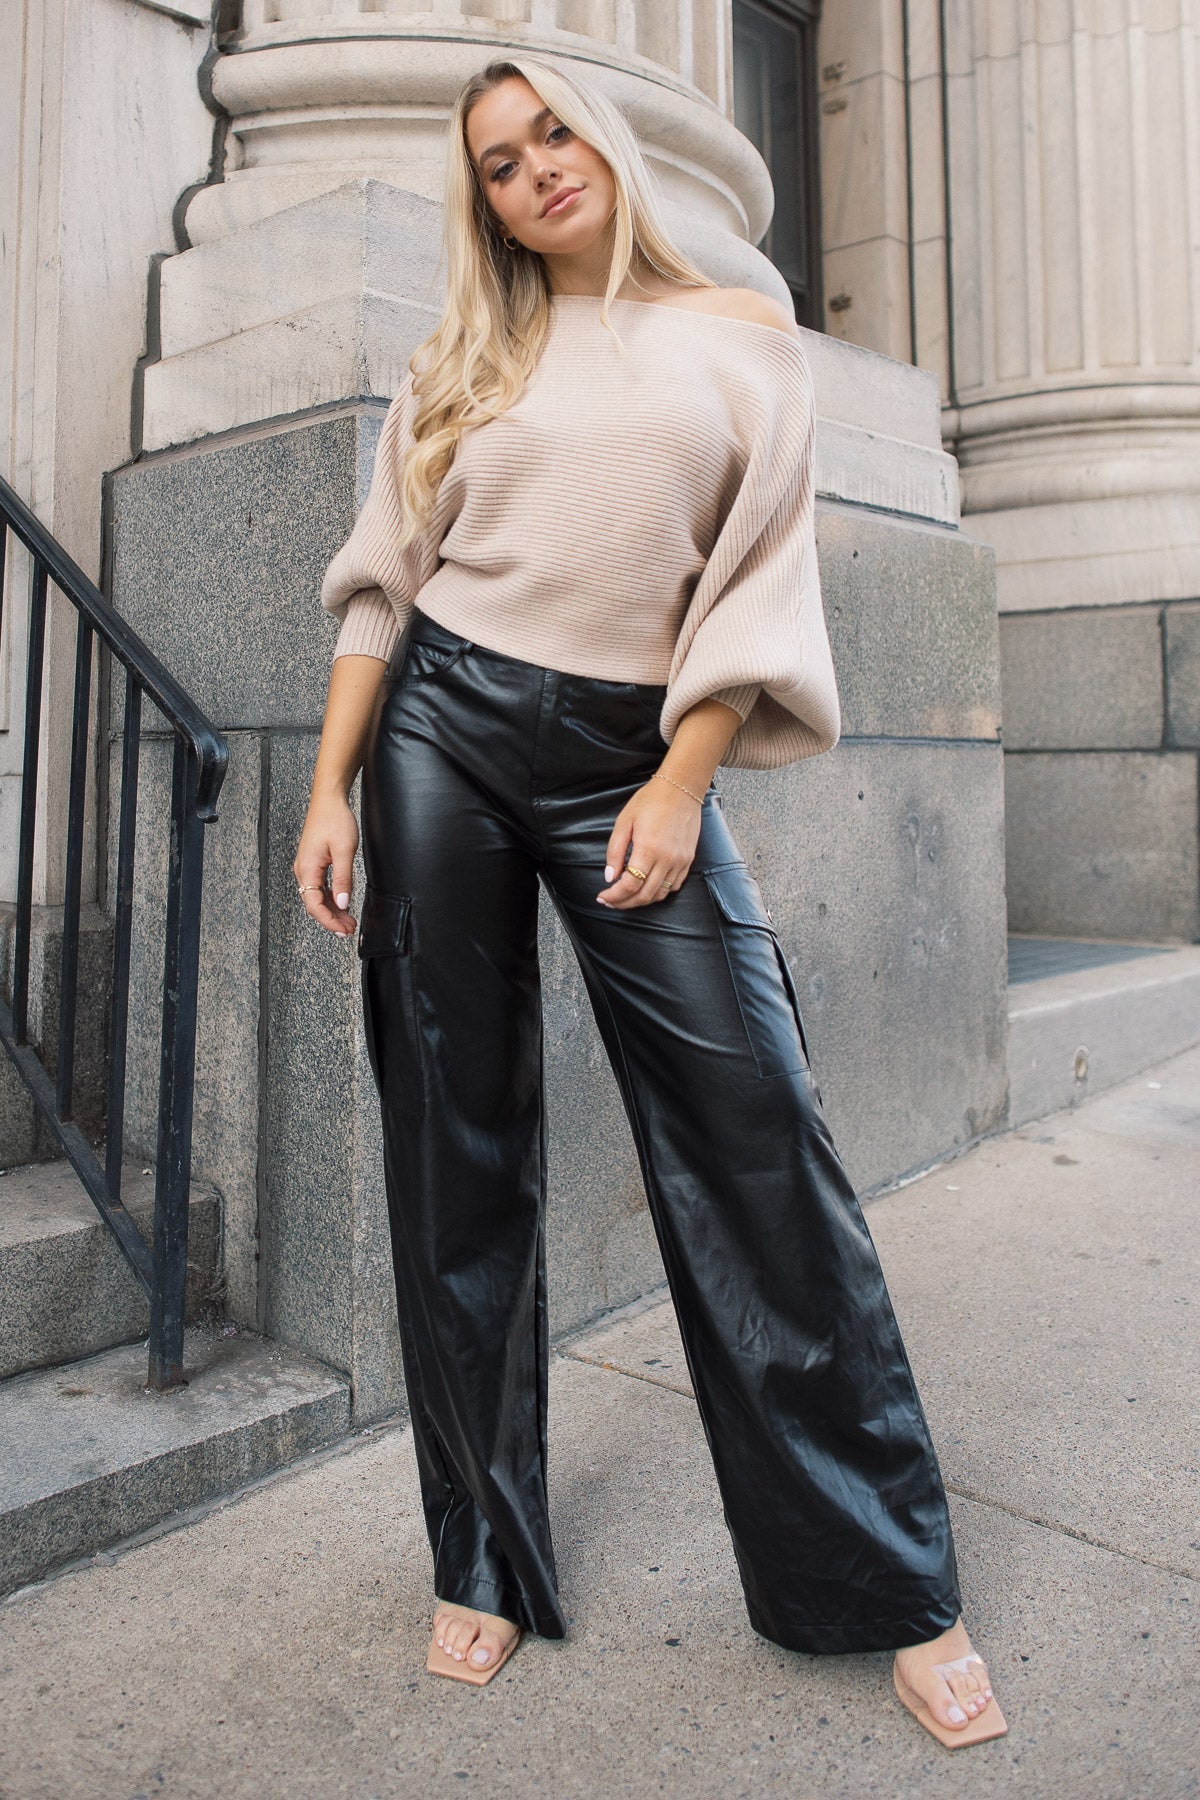 badest.outfits on Instagram: “black leather pants”  Leather trousers outfit,  Leather pants outfit, Black leather pants